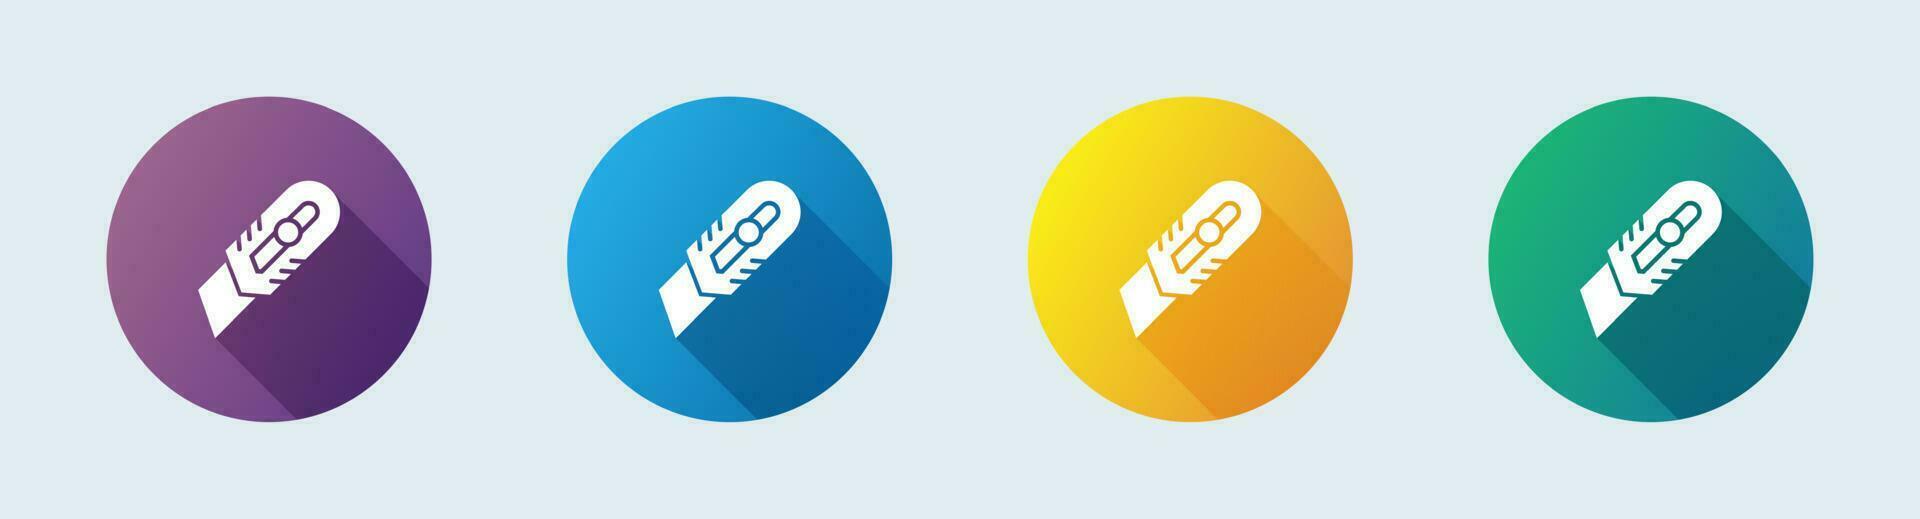 Cutter solid icon in flat design style. Tool signs vector illustration.